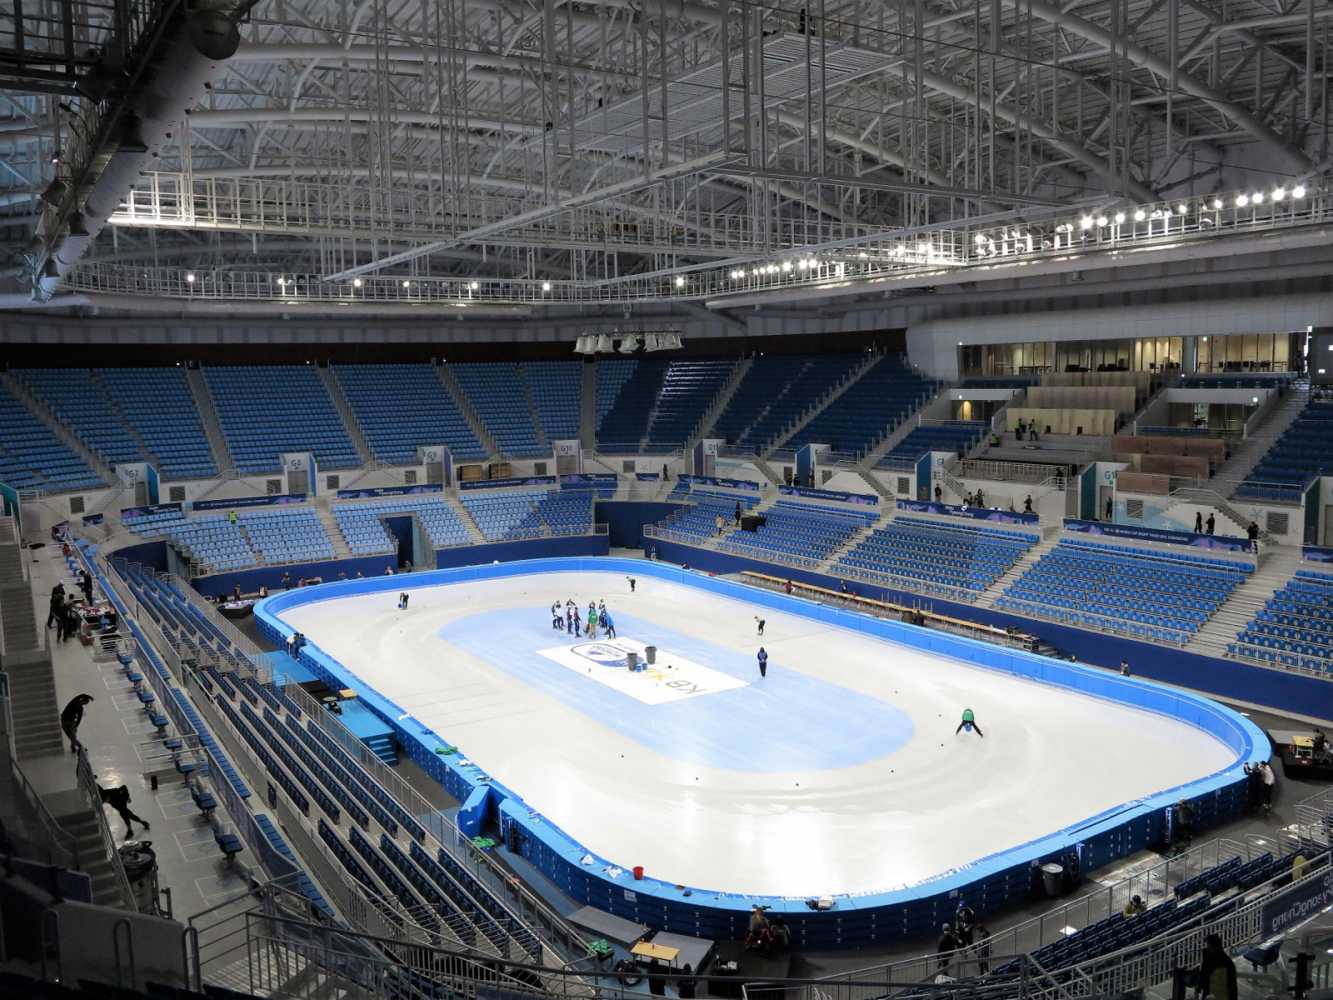 The sound system for the Gangneung Ice Arena was designed and supplied by Inter-M Corporation